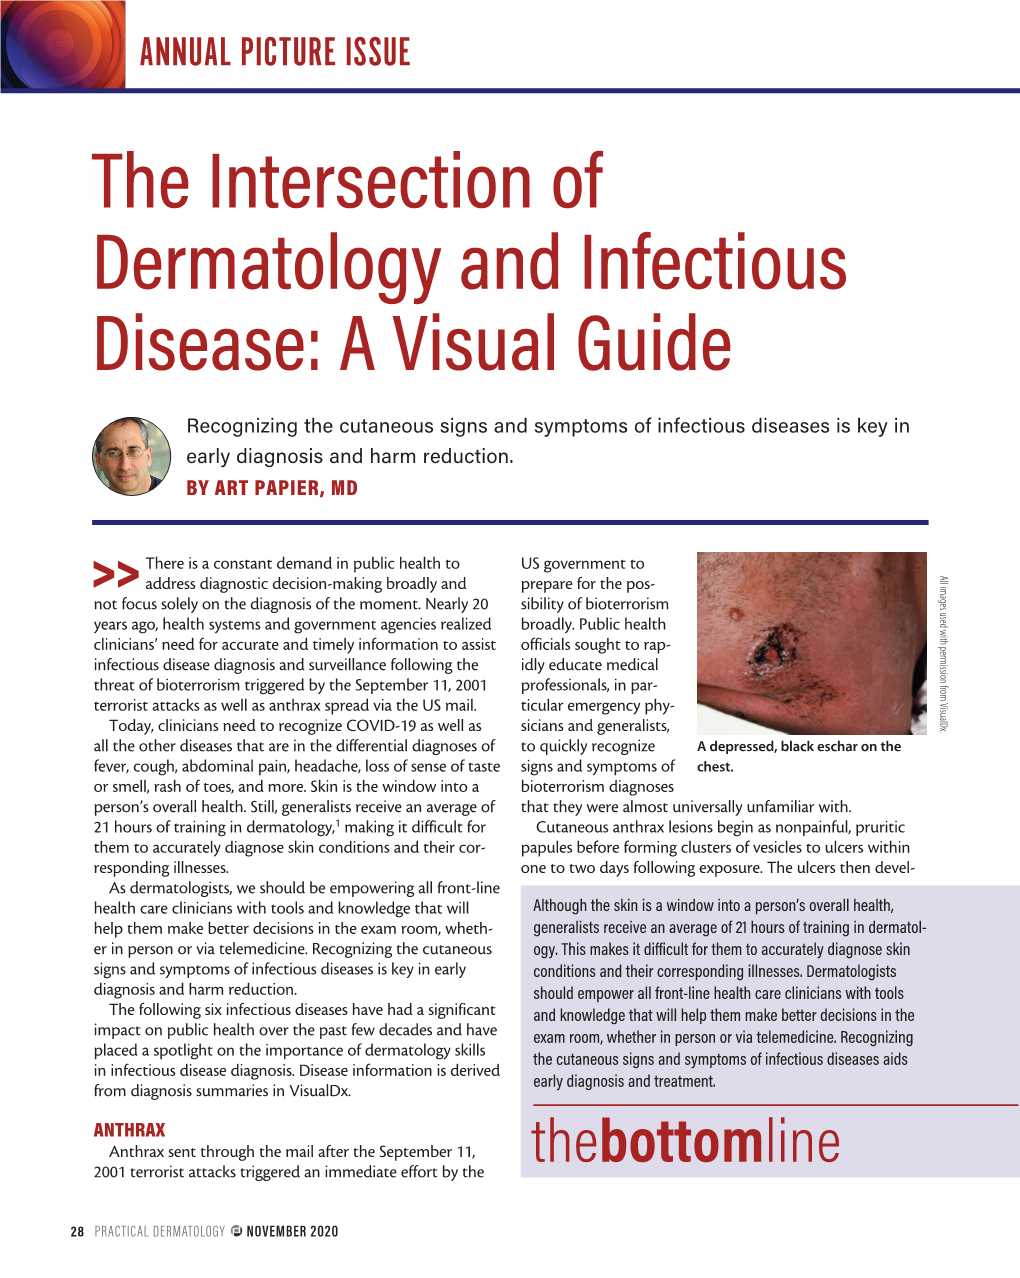 The Intersection of Dermatology and Infectious Disease: a Visual Guide